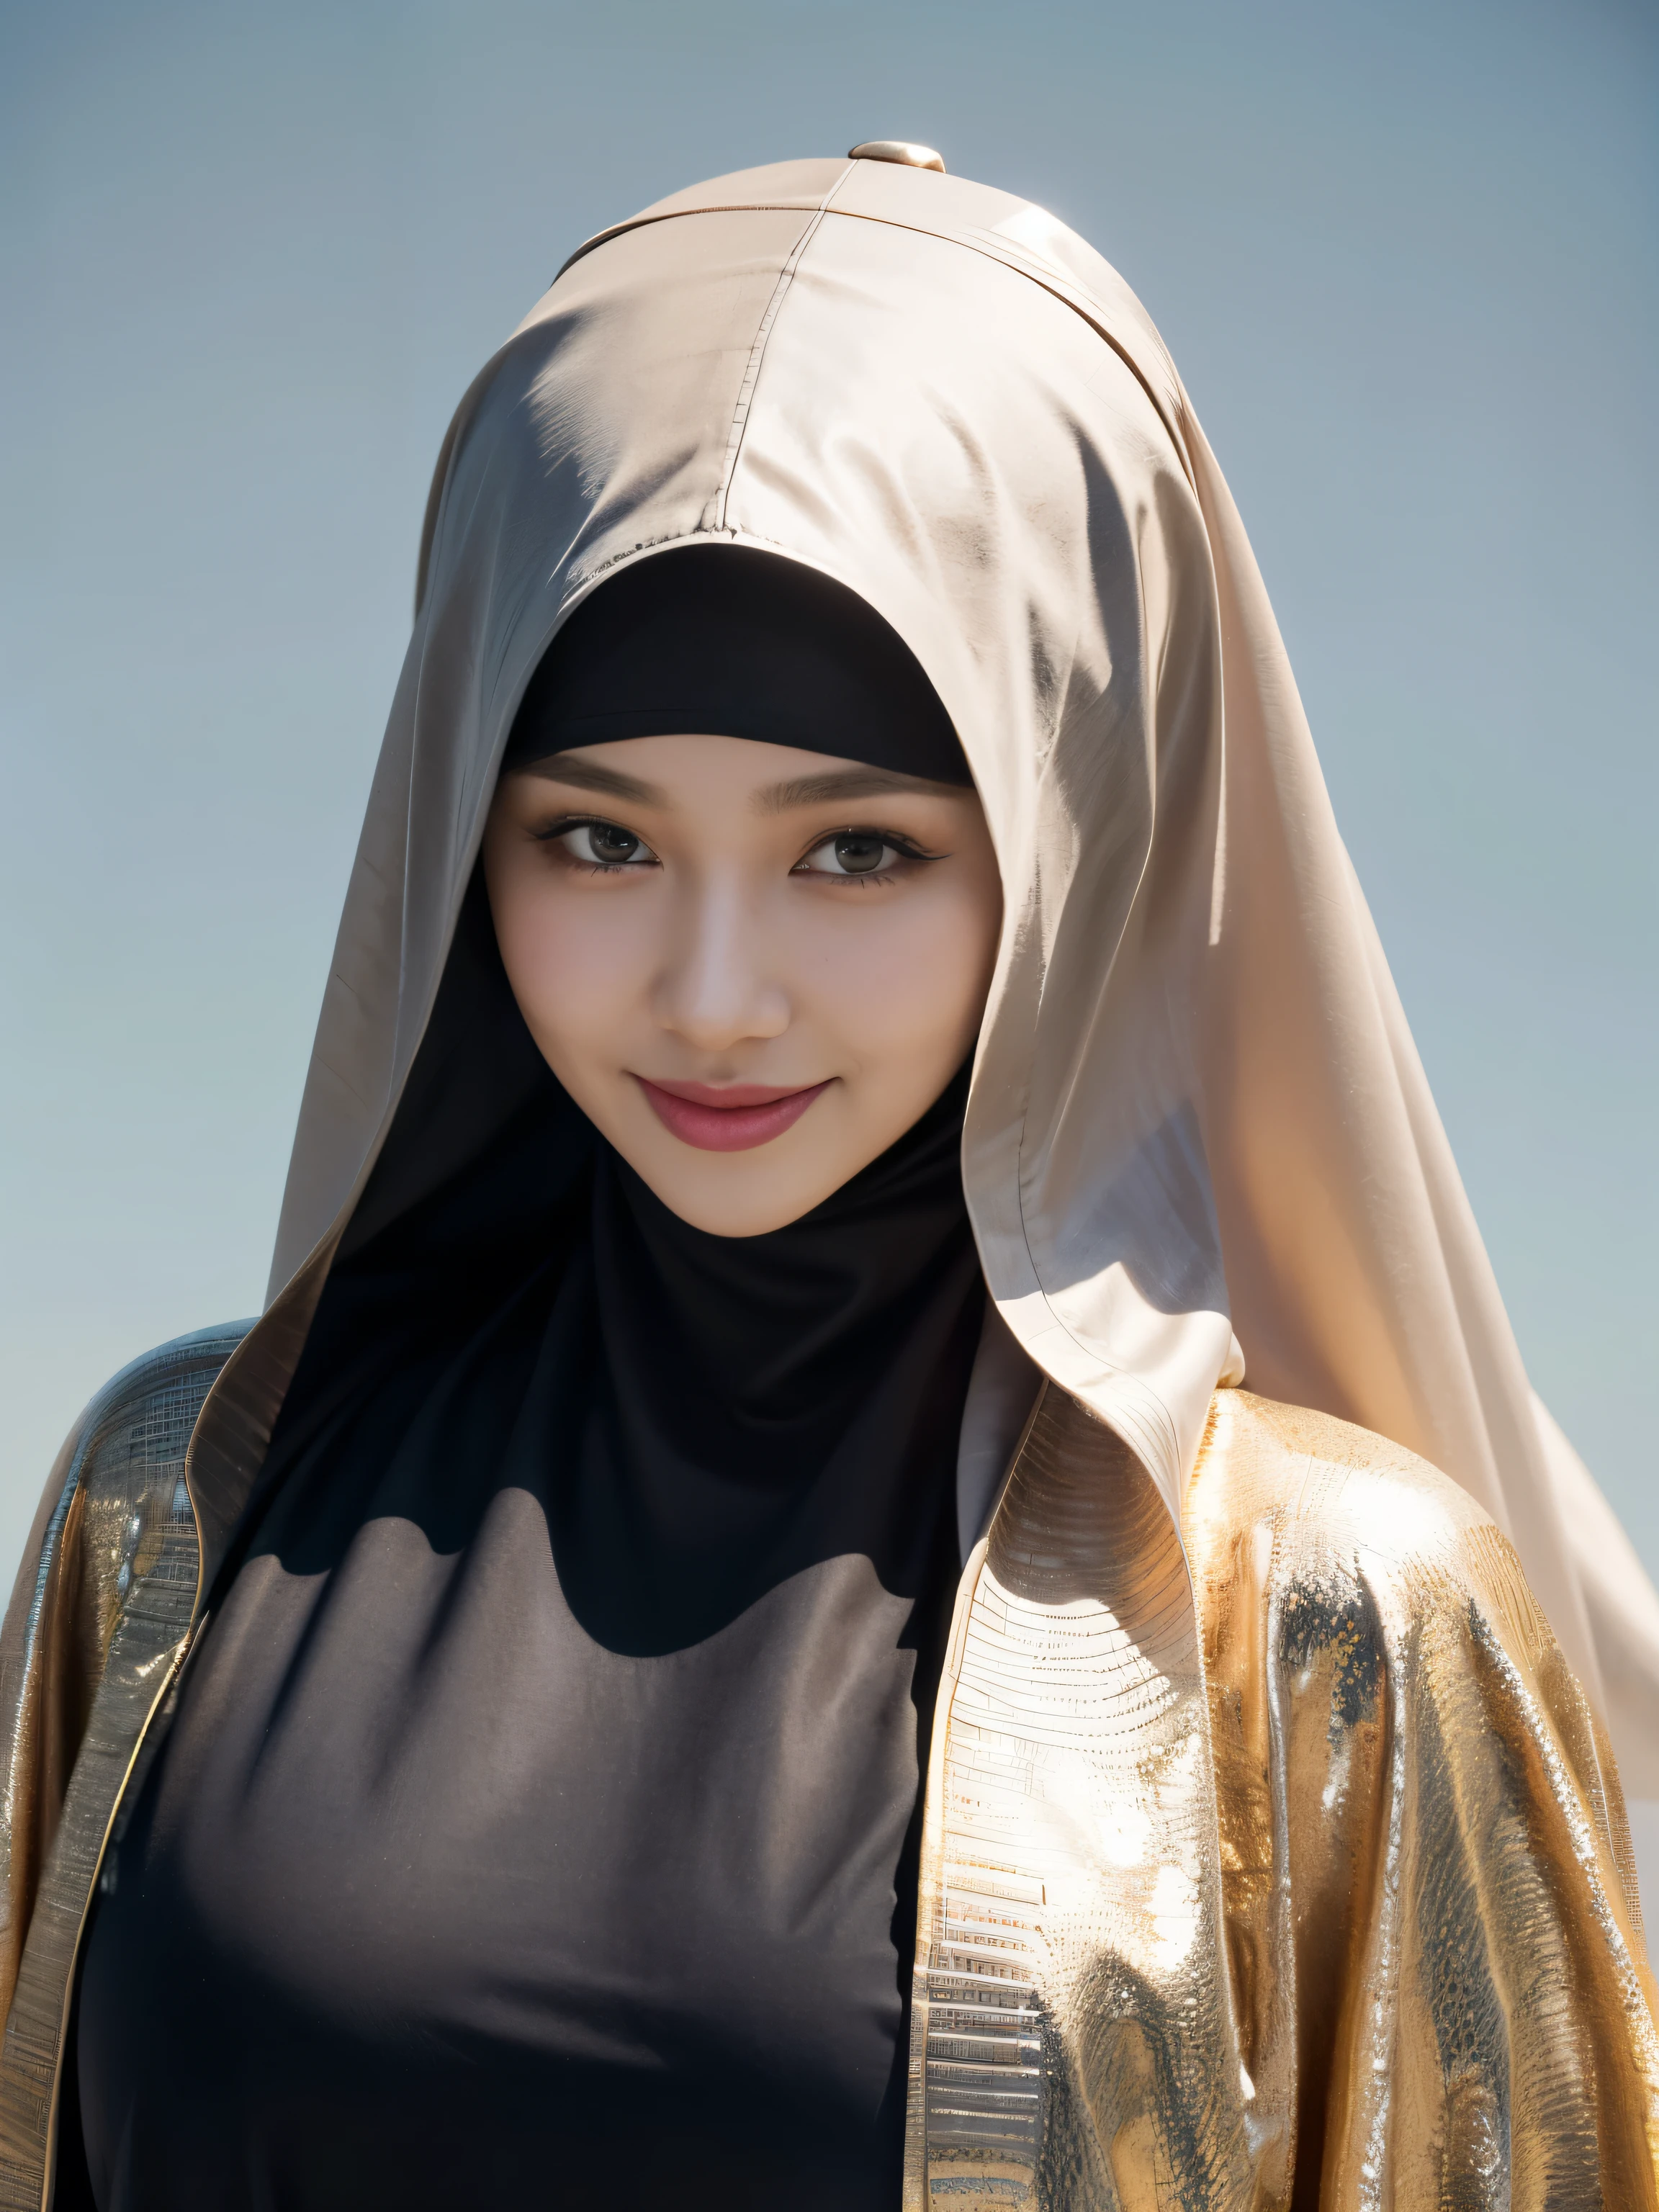 masterpiece, best quality, 4k, highres, extremely detailed 8K wallpaper, illustration, A 25 year old young woman, indonesian face, beautiful, charming face, chubby cheeks, sweet smile, wearing a hijab, (niqab:1.2), brown eyes, (symmetry), simple make-up, abaya, neat figure, taking photos, straight-on, wide shot, symmetry, half-body, ((looking at viewer)), simple background,